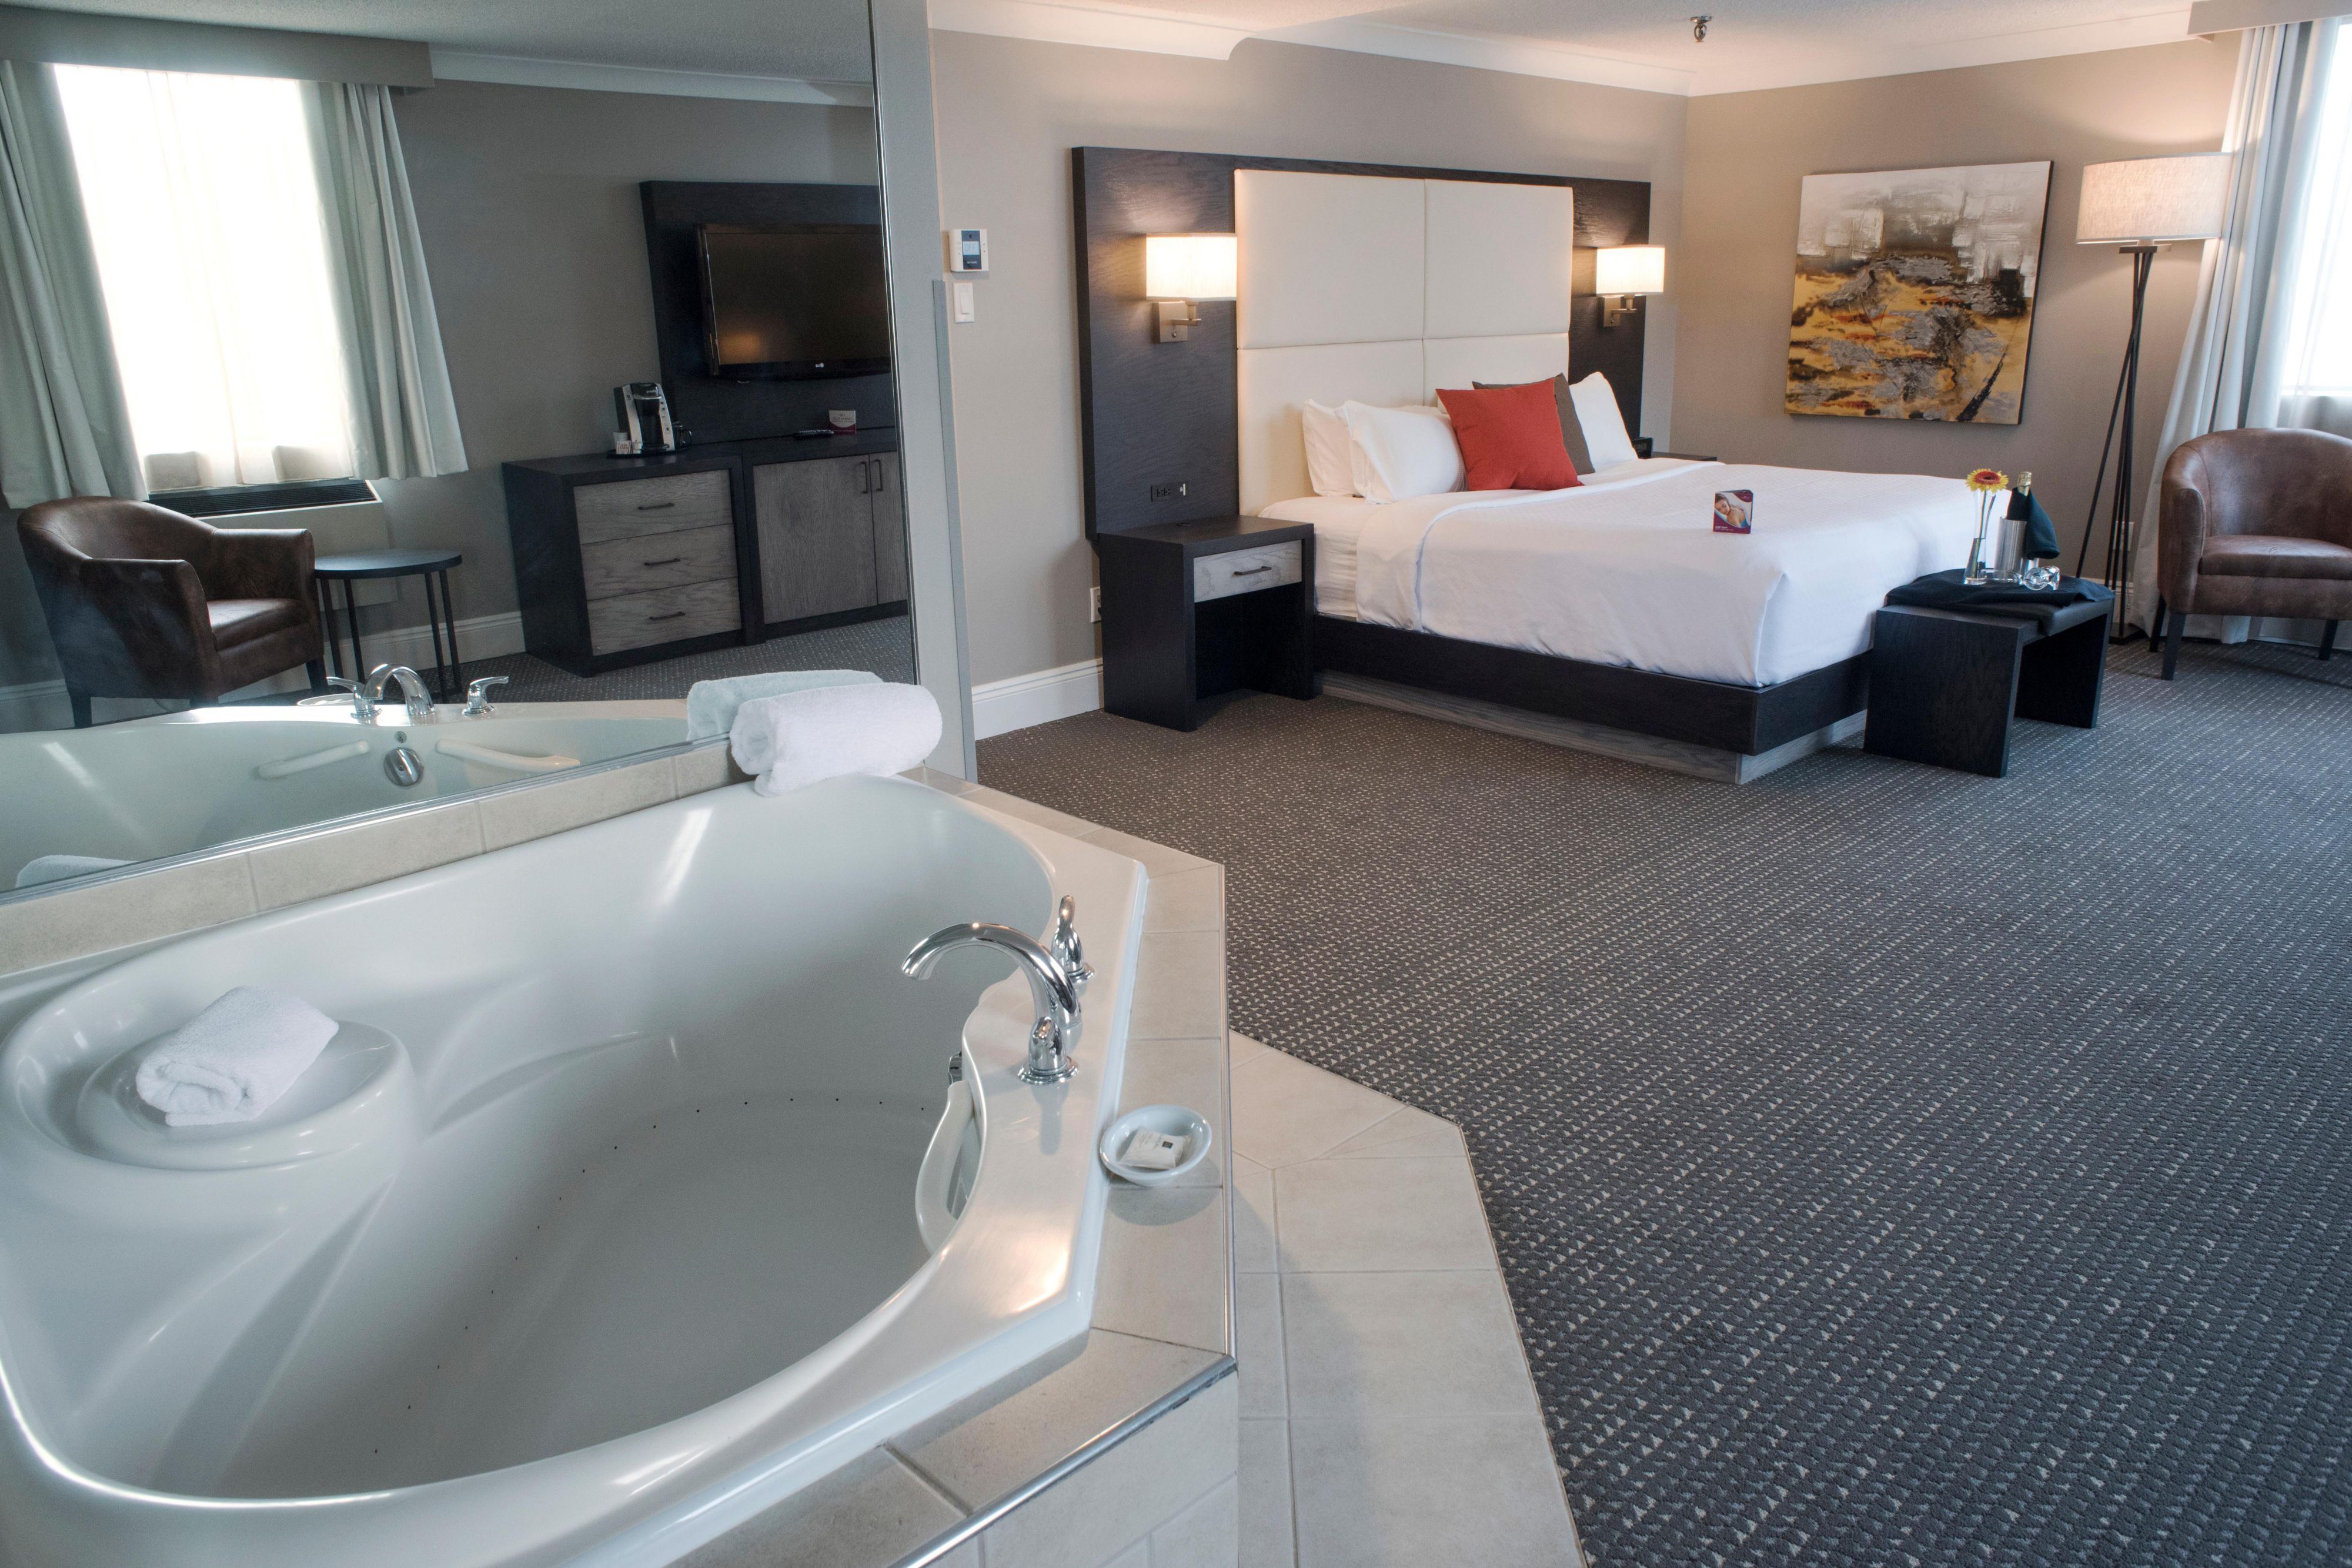 Enjoy your stay in our relaxing Jacuzzi Suite